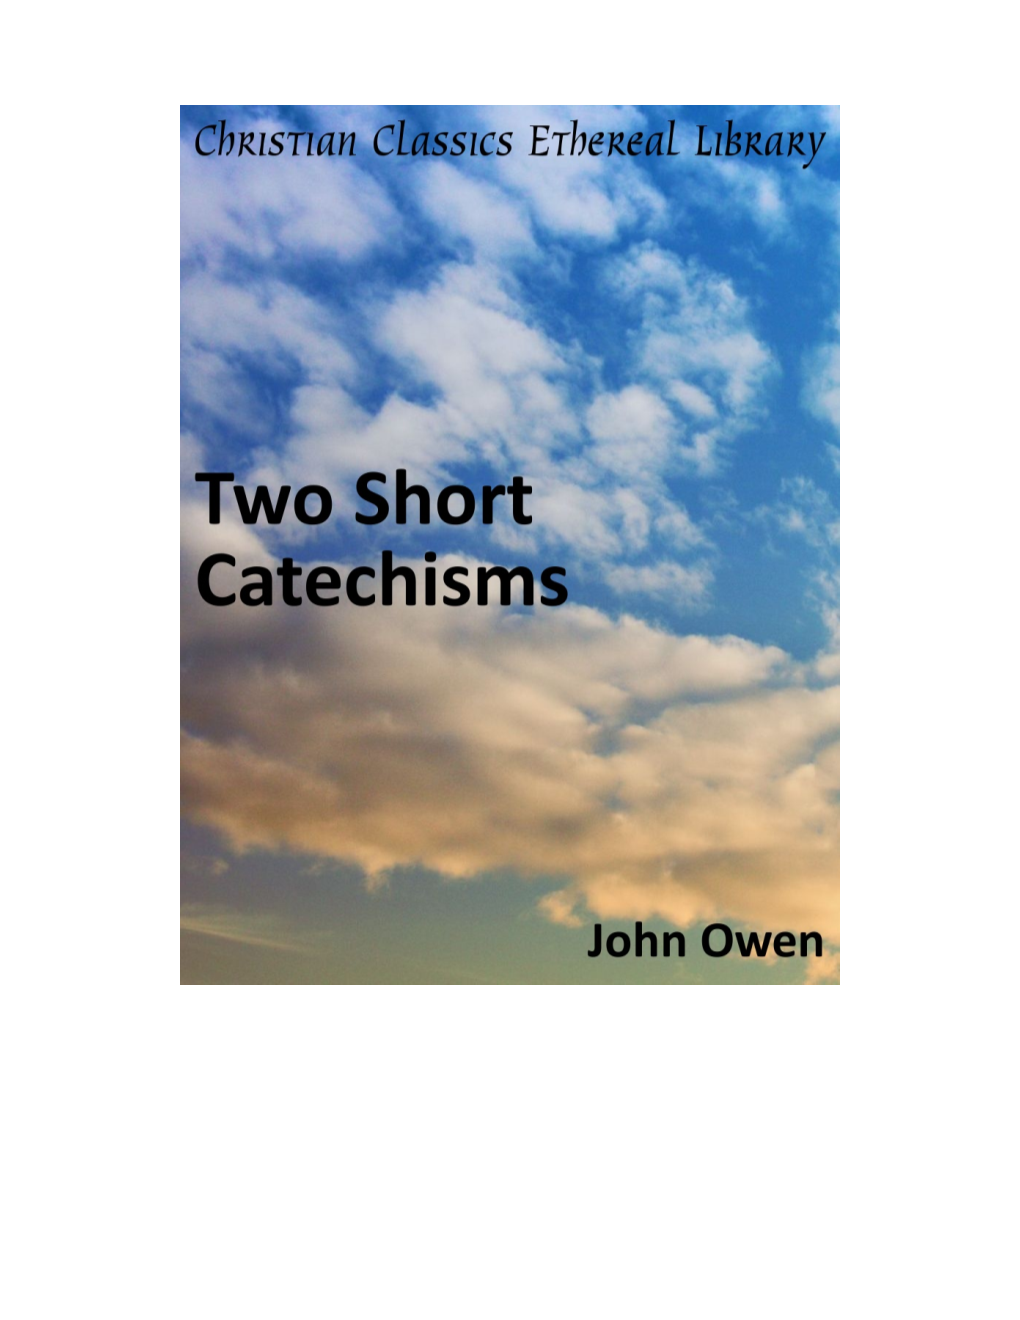 Two Short Catechisms